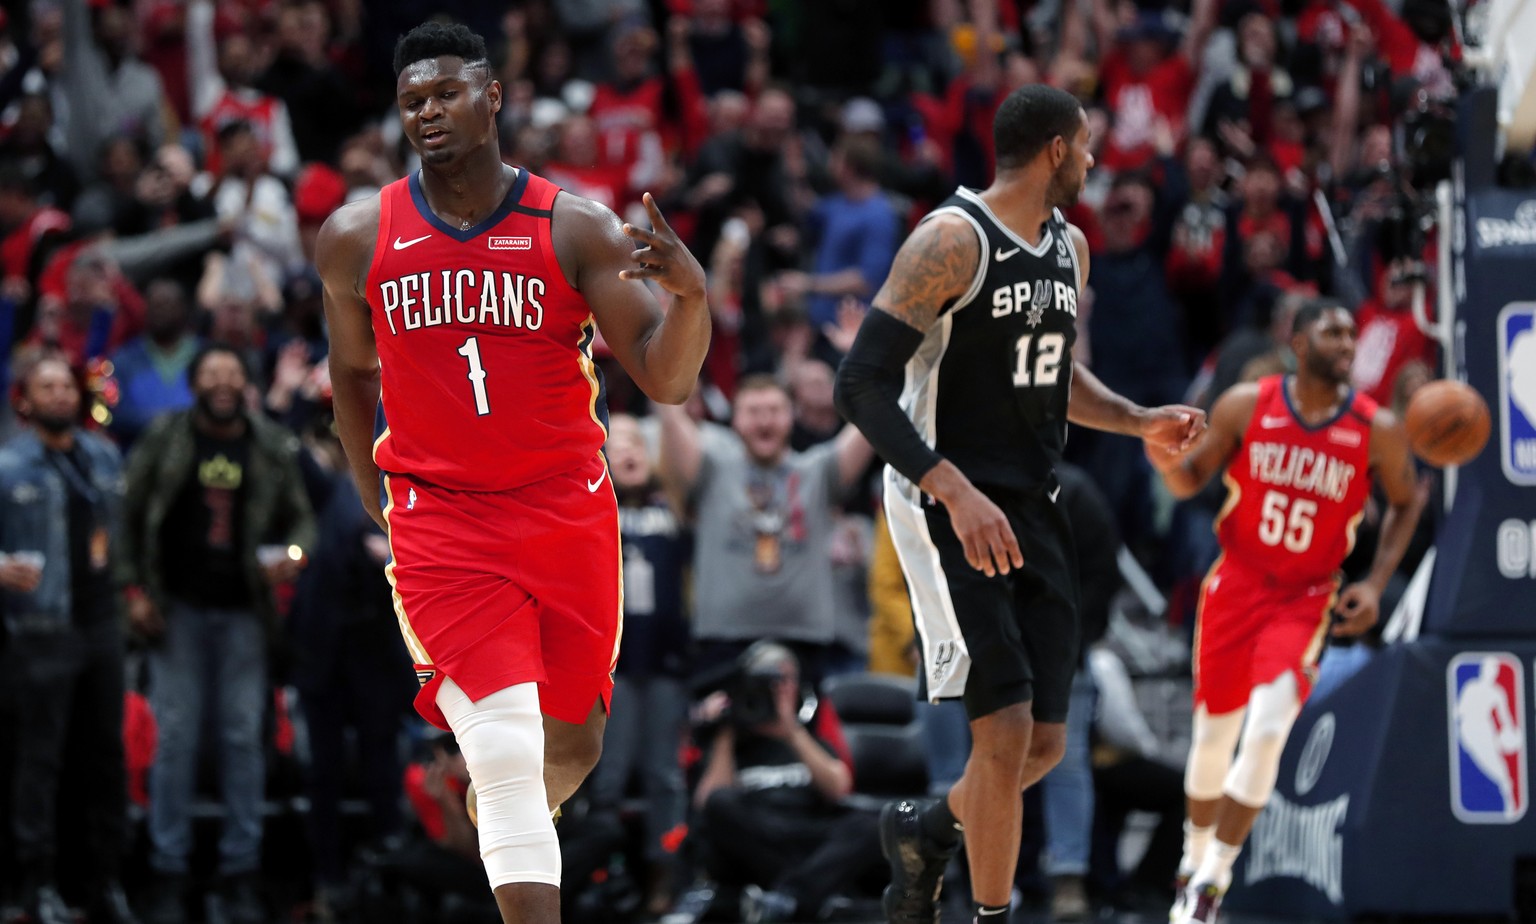 New Orleans Pelicans forward Zion Williamson (1) reacts after making a 3-point basket in the second half of an NBA basketball game against the San Antonio Spurs in New Orleans, Wednesday, Jan. 22, 202 ...